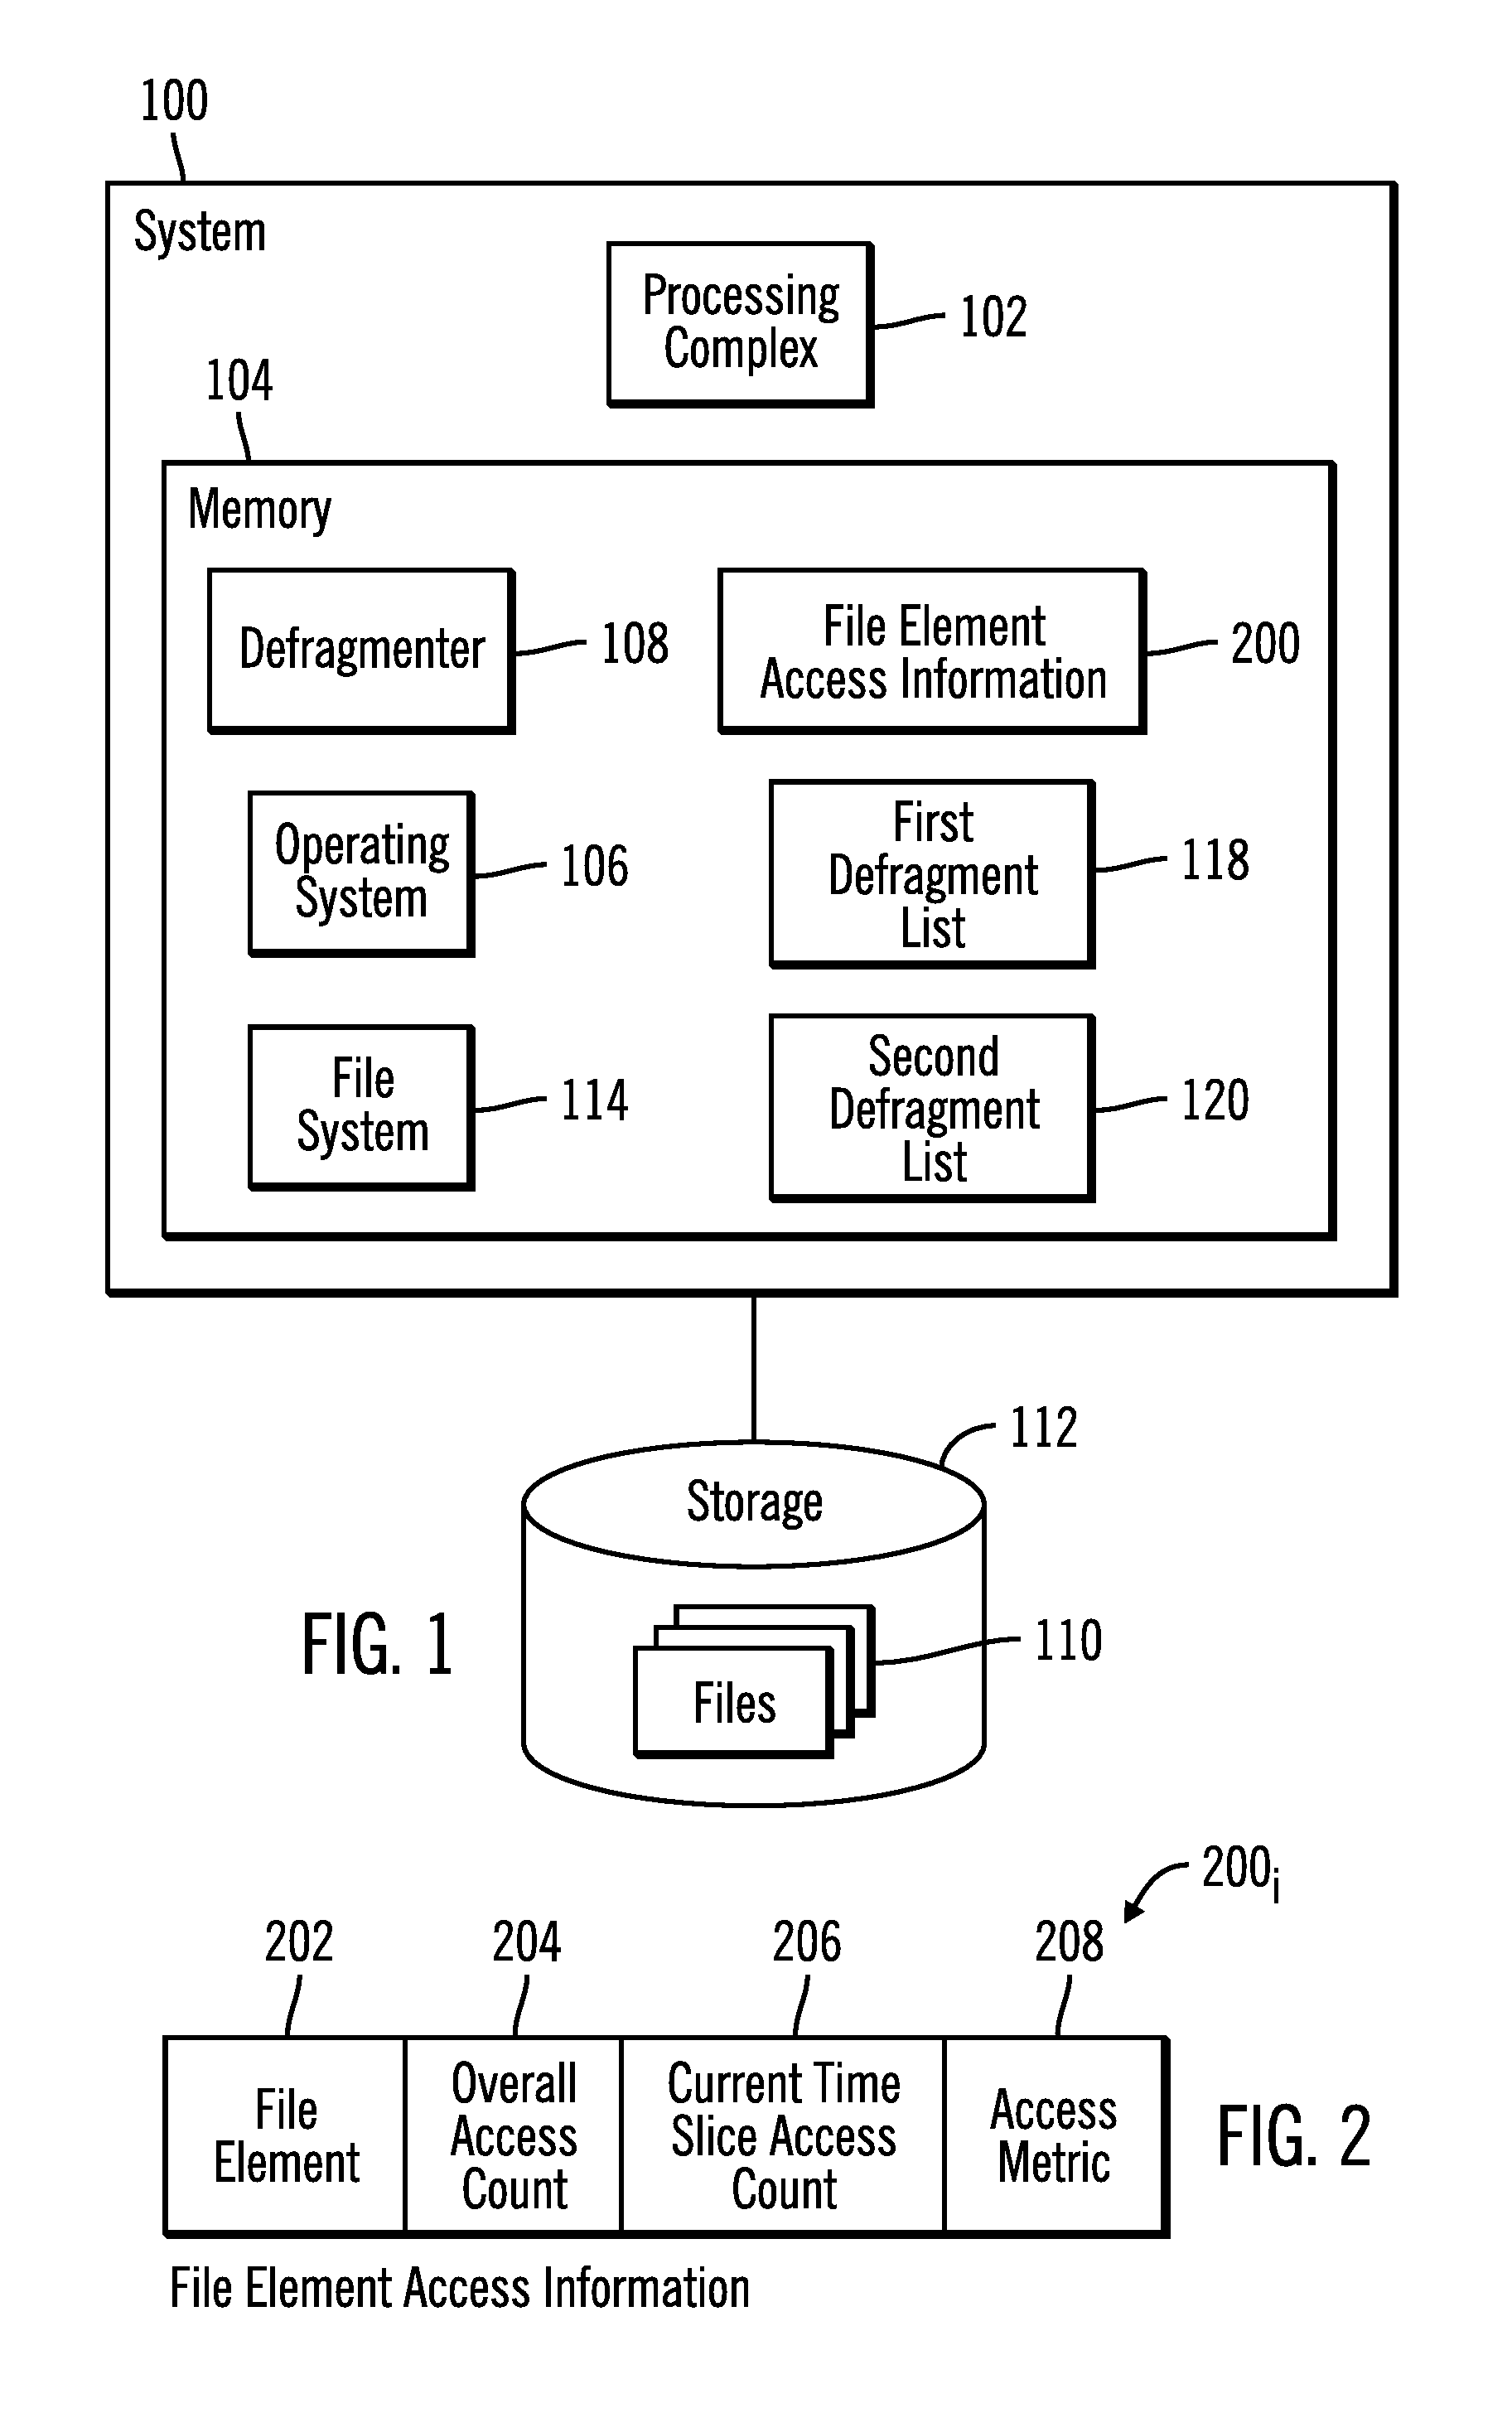 Using file element accesses to select file elements in a file system to defragment